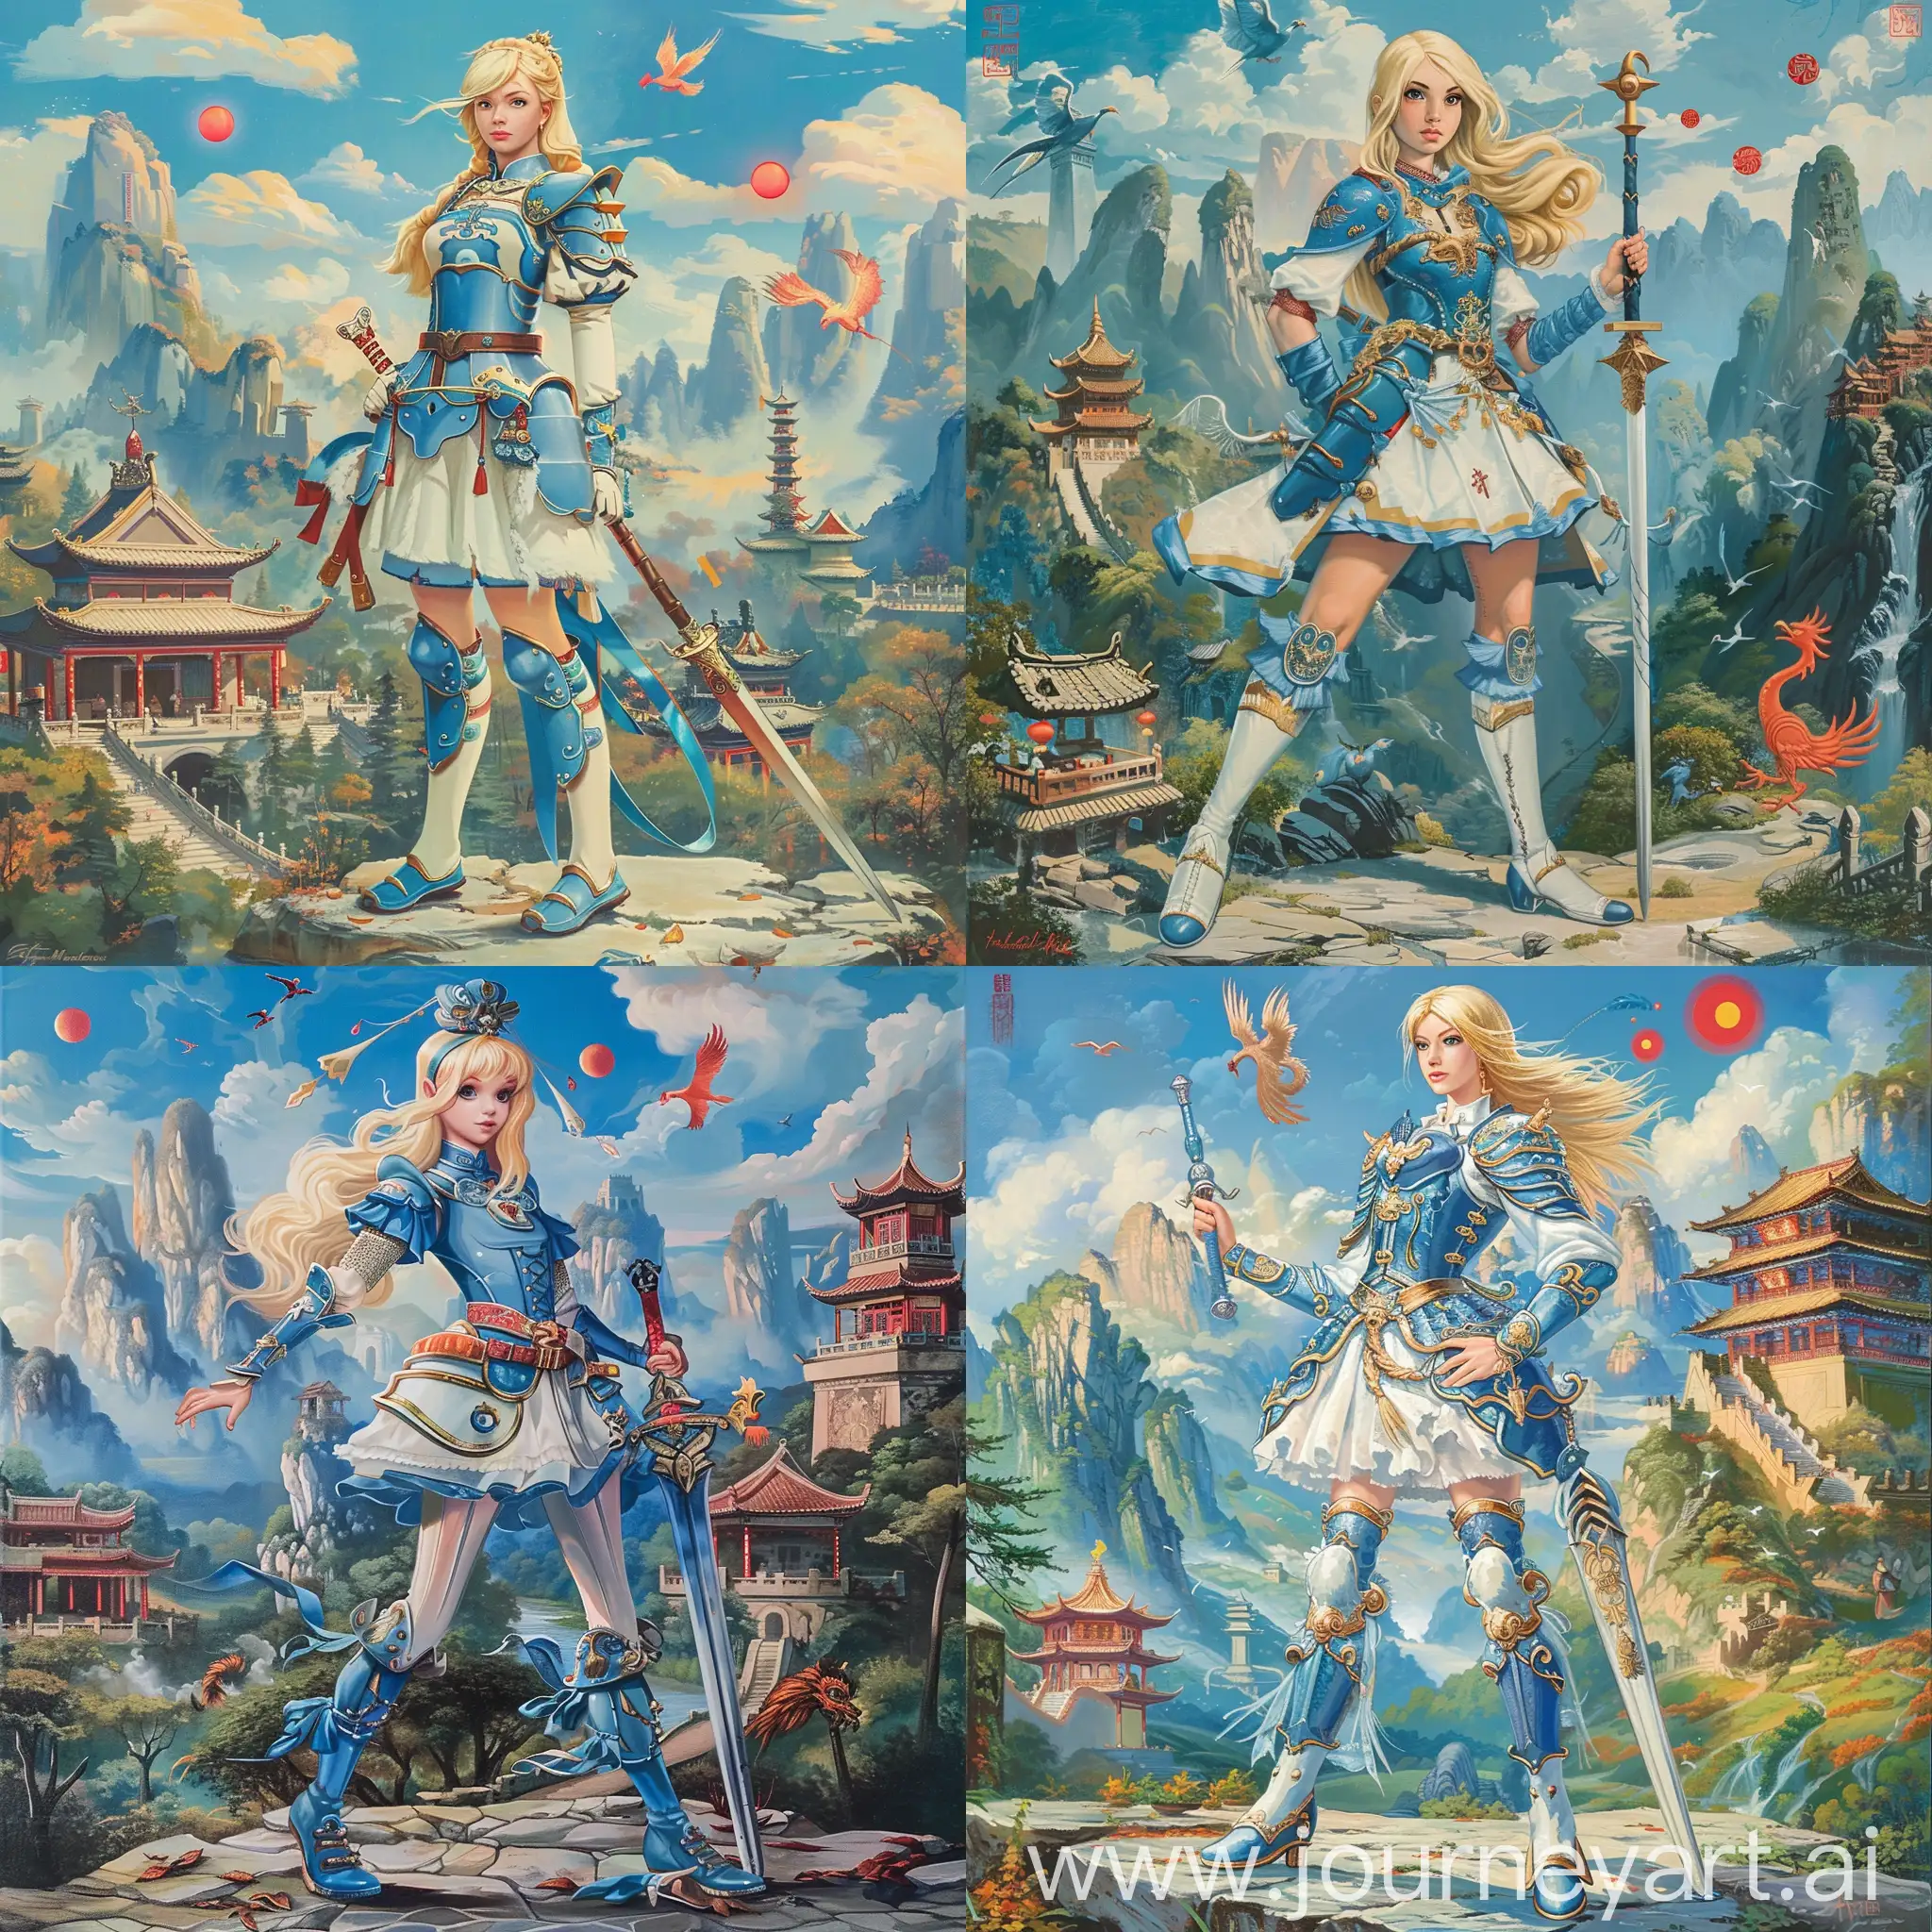 Historic painting style:

a Disney blond British Princess Alice, she wears blue and white color Chinese style medieval armor and boots, she holds a Chinese sword in right hand, 

Chinese Guilin mountains and temple as background, small phoenix and three small red suns in blue sky.